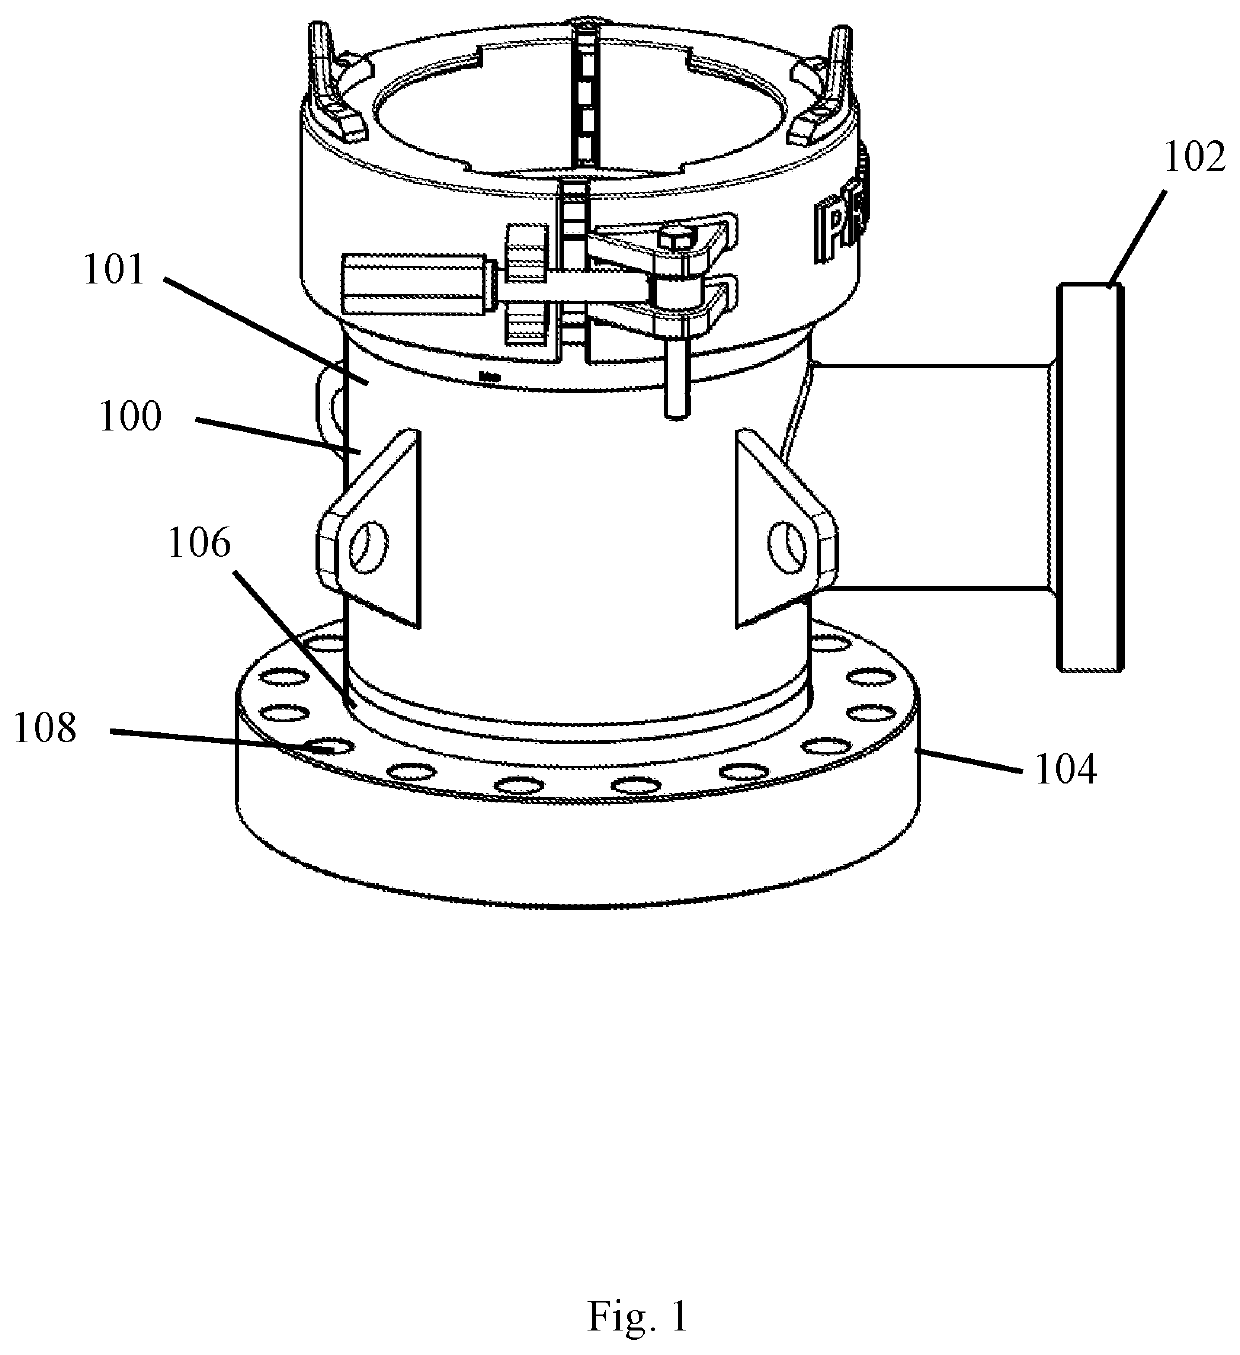 Swivel device for rotating a bowl